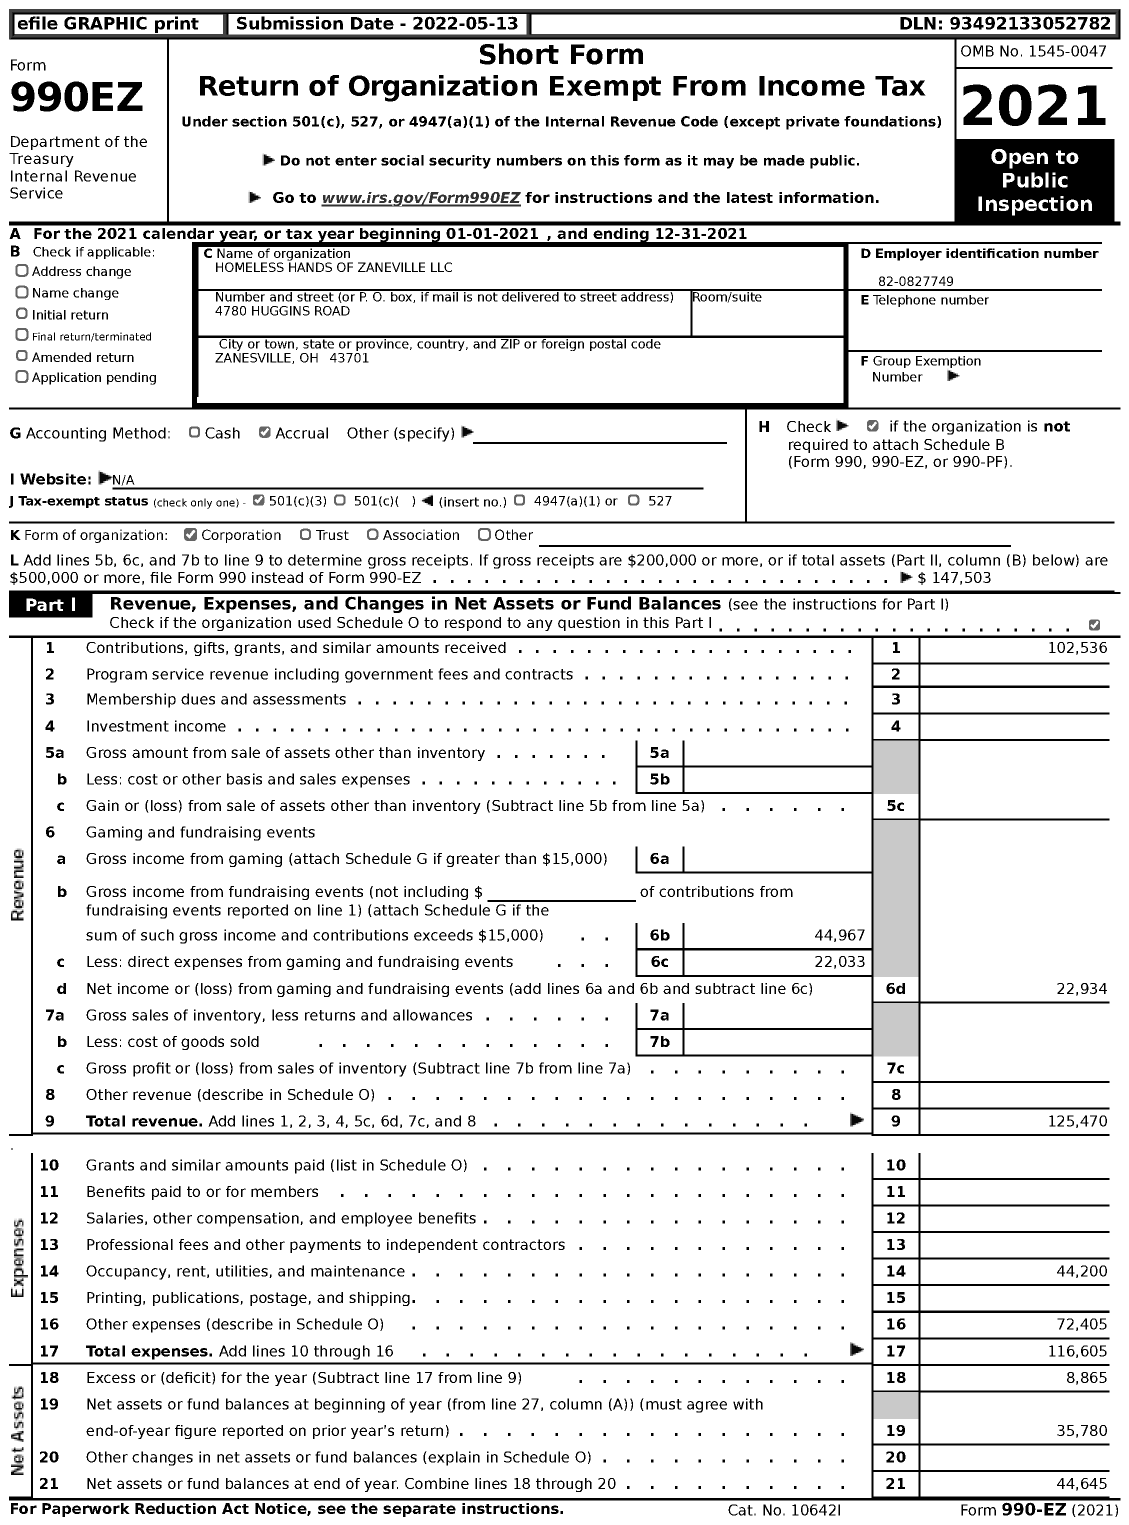 Image of first page of 2021 Form 990EZ for Homeless Hands of Zaneville LLC